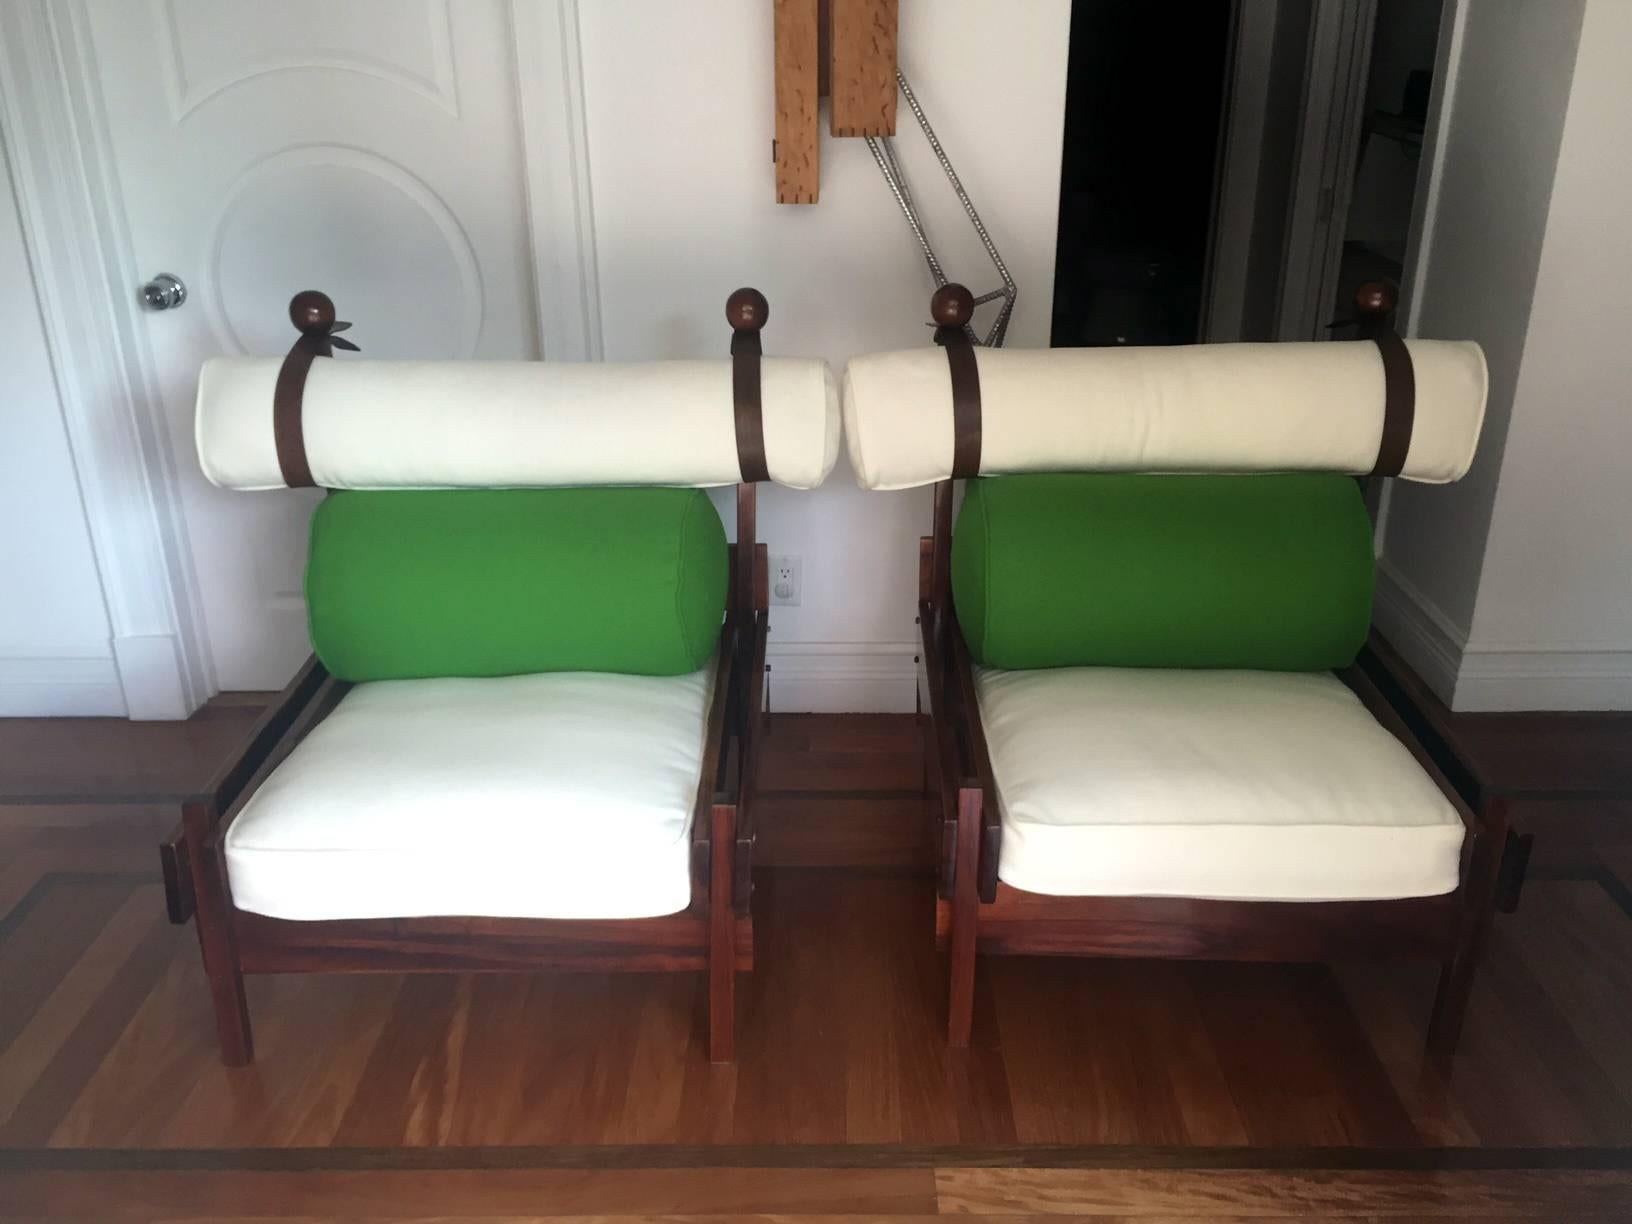 A pair of vintage rosewood lounge chairs designed by Sergio Rodrigues, made by Oca for Meia Pateca in Brazil, circa 1963. Modeled as 